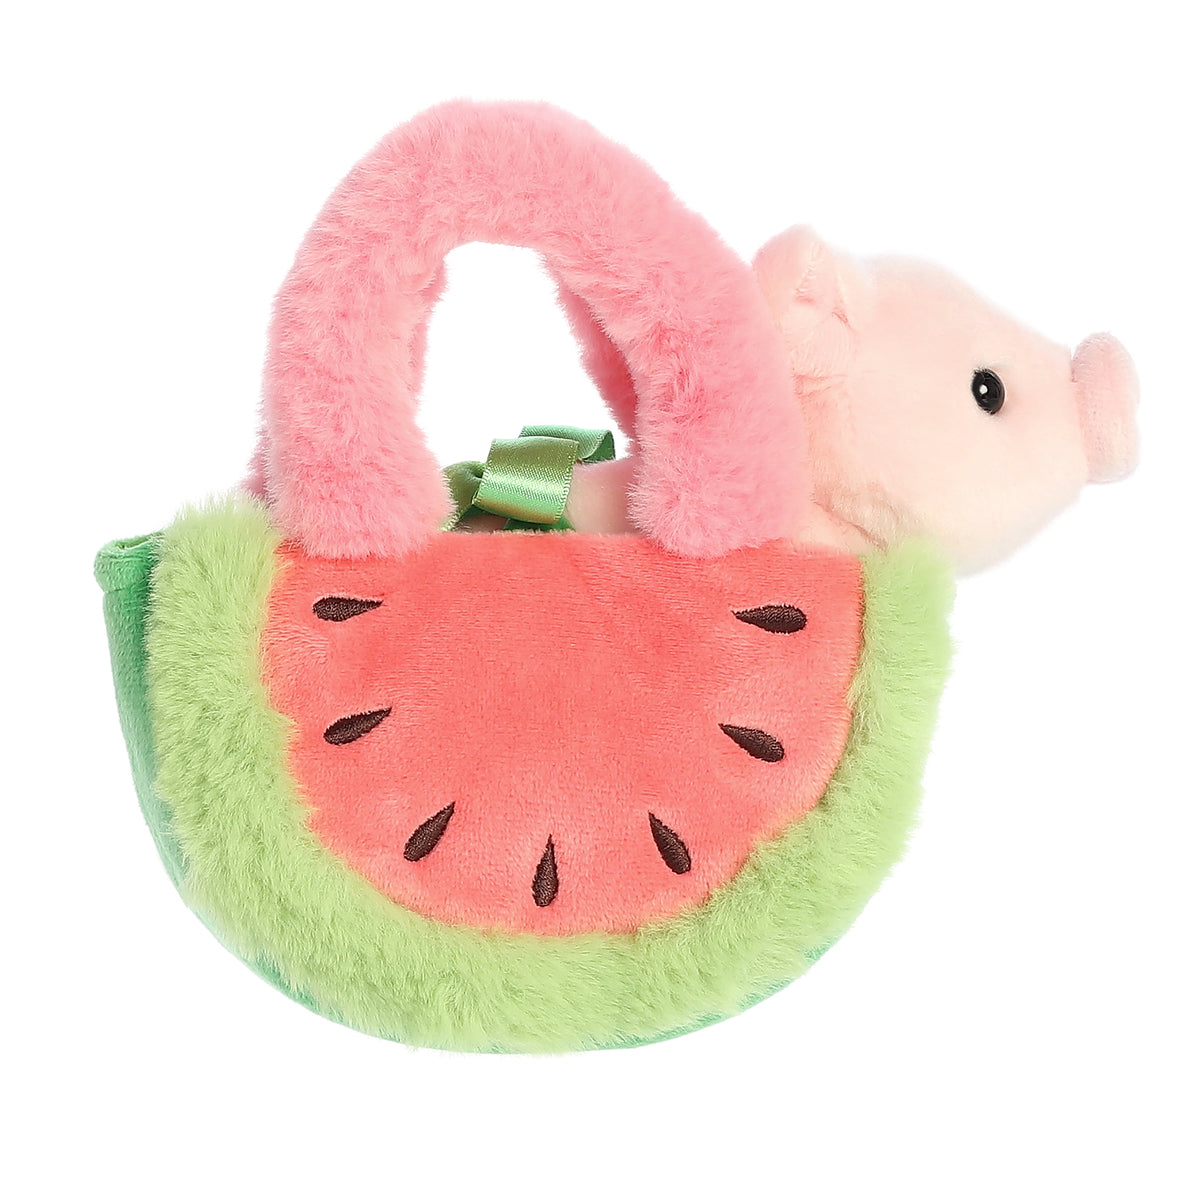 Fuzzy Watermelon Piglet plush carrier by Aurora with pink straps, carrying a charming piglet stuffed animal inside.